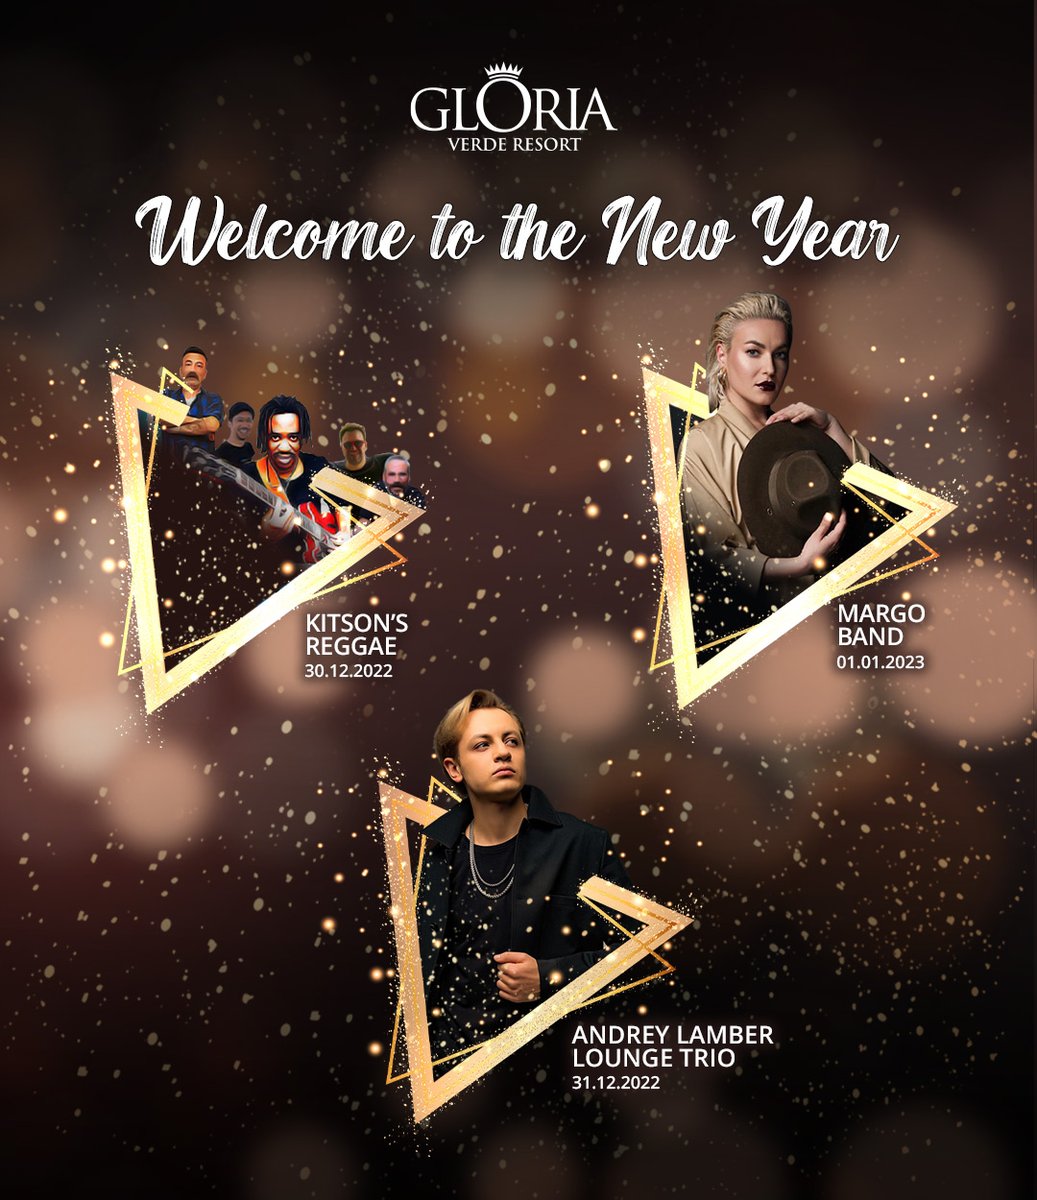 Gloria Hotels & Resorts will welcome the New Year with unique delicacies, surprise treats and a beautiful stage performance by Nelly White Band. For reservation: +90 242 710 23 00 gloria.com.tr #GloriaHotels #BecauseHereisGloria #GloriaGolf #GloriaVerde